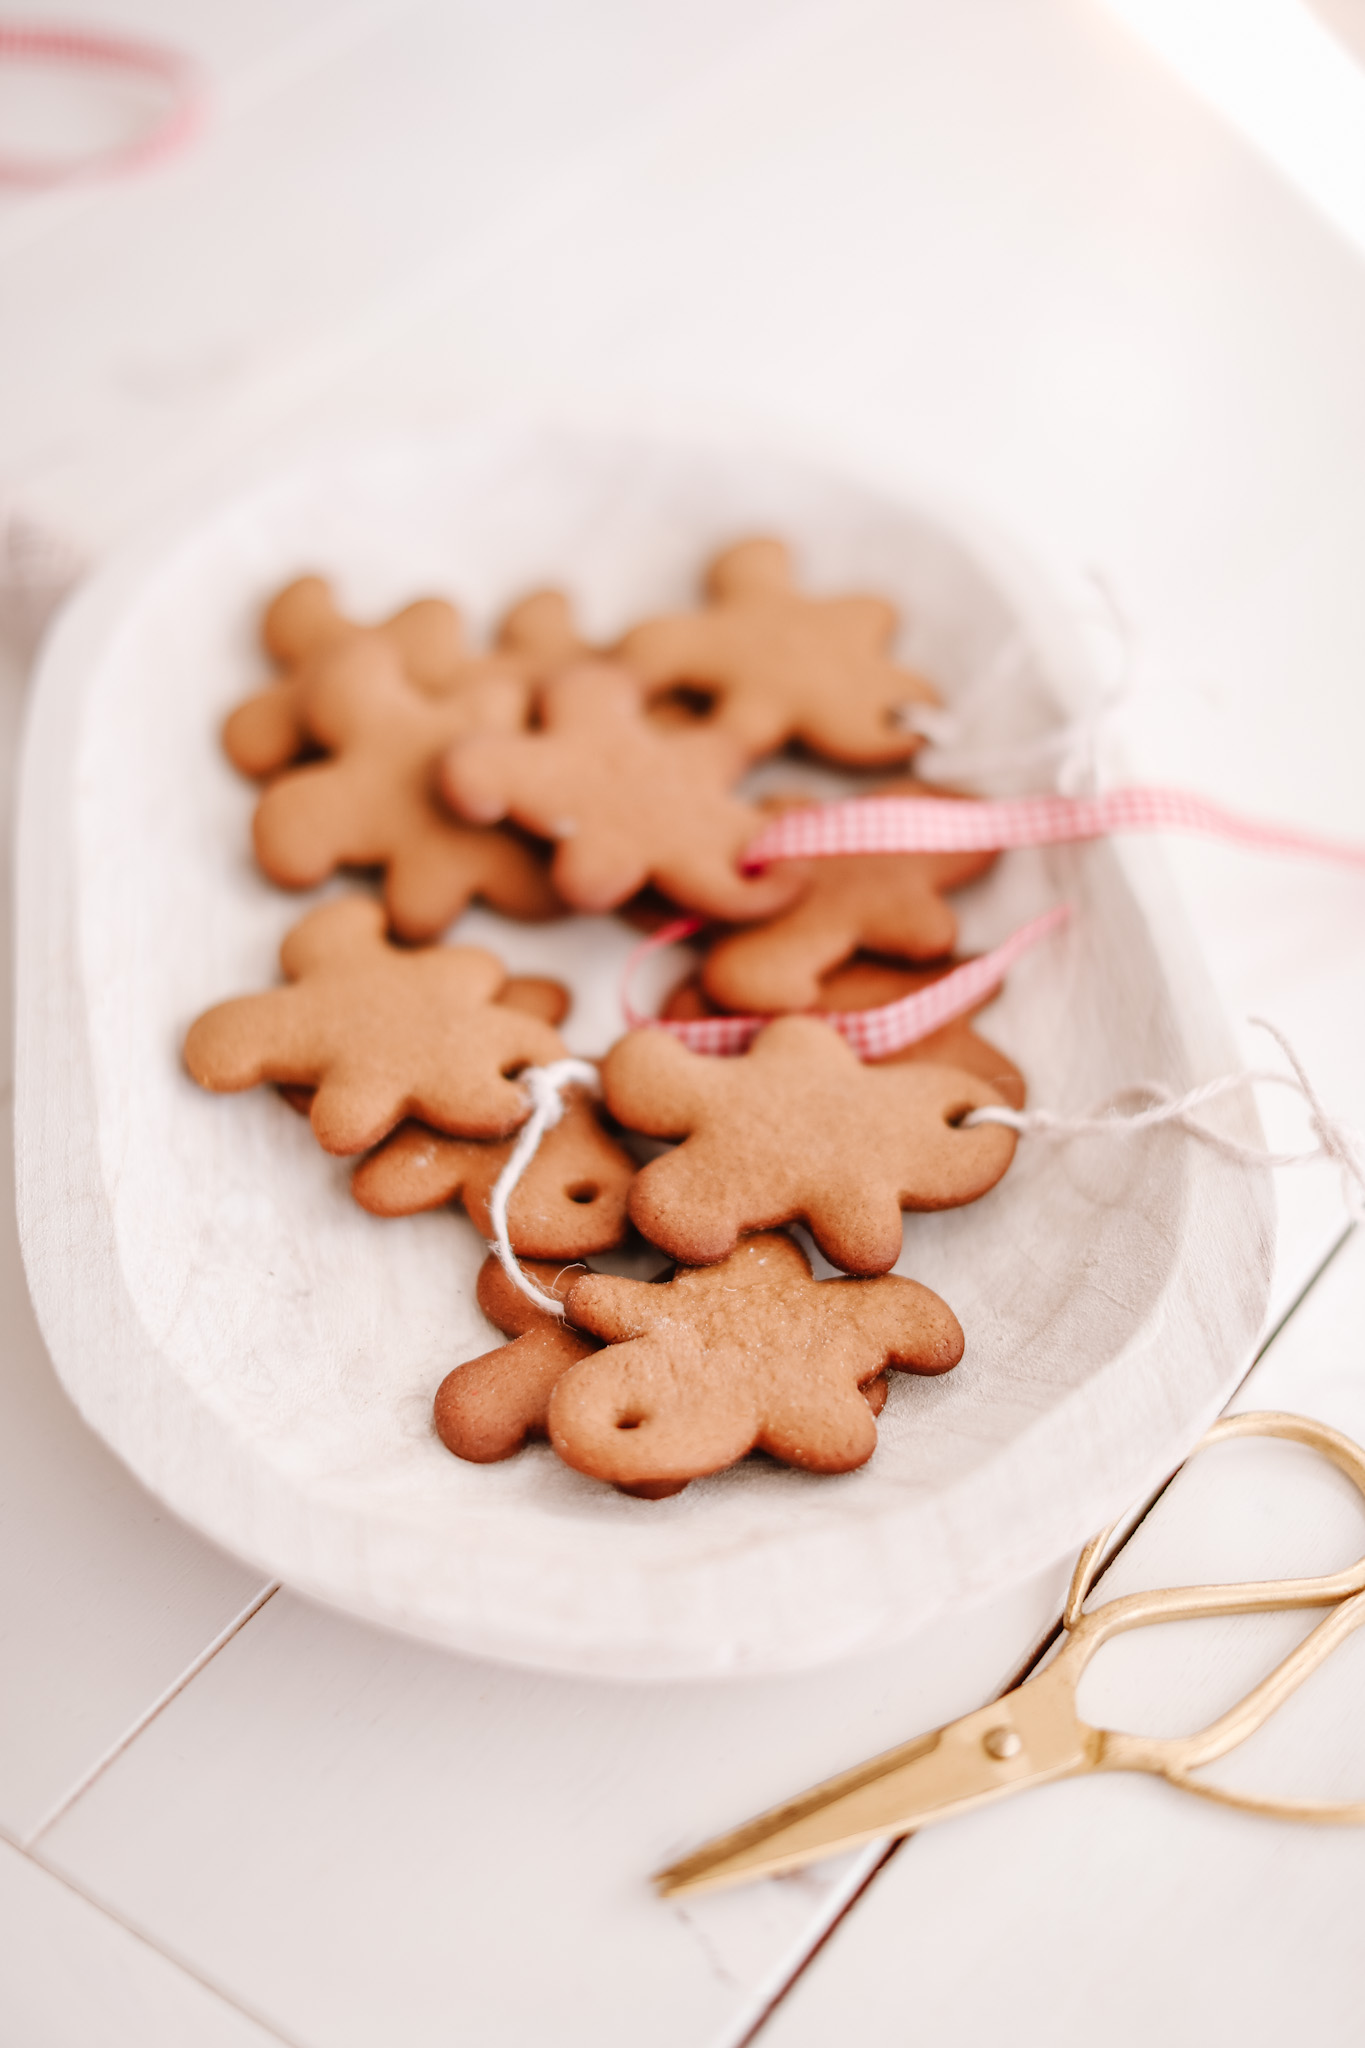 How to make gingerbread ornaments